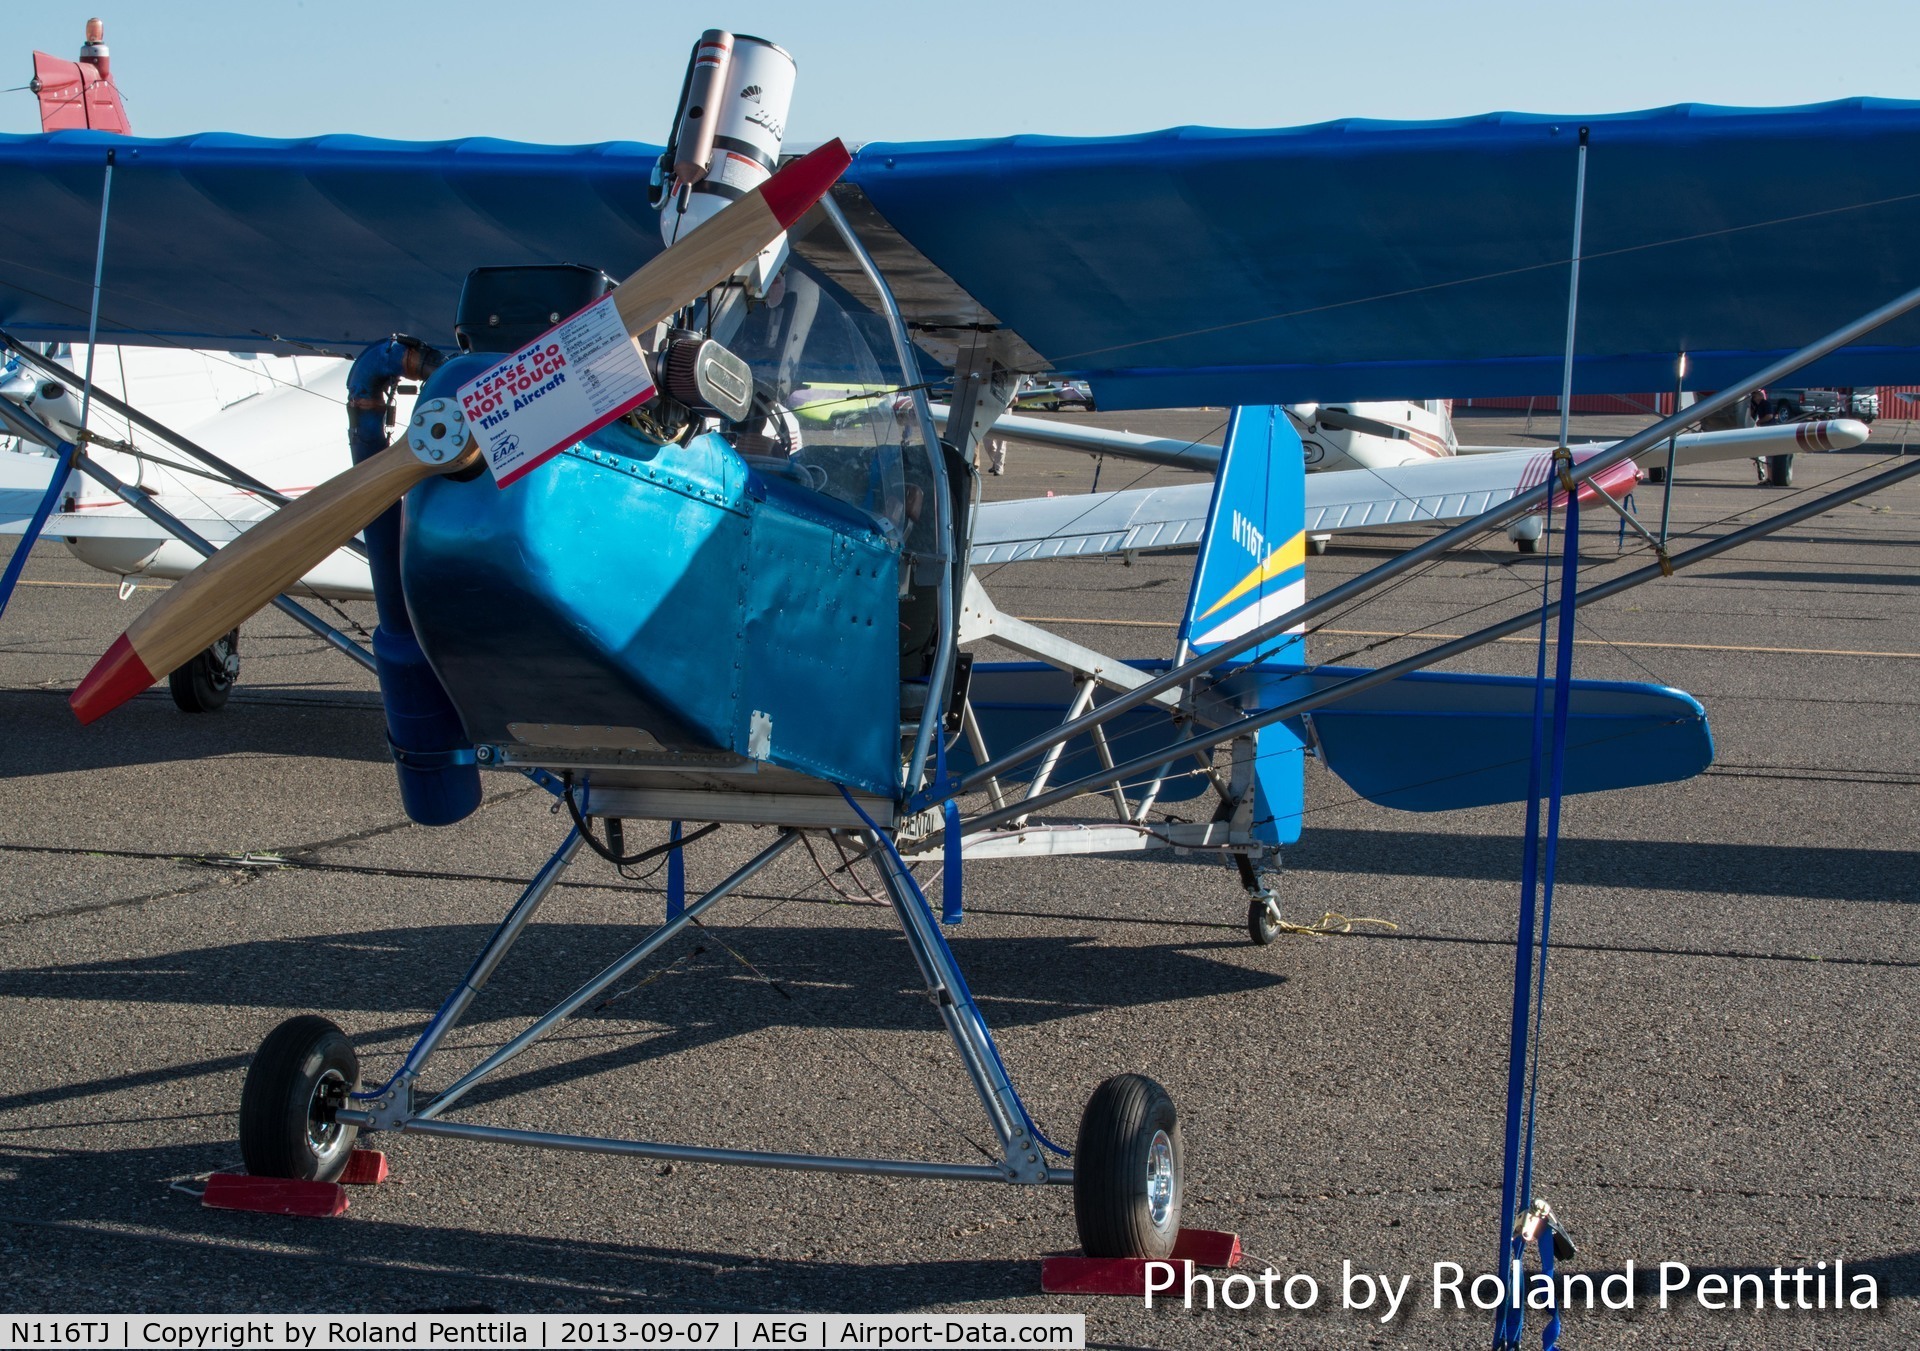 N116TJ, Affordaplane A Plane C/N A116, EAA Fly-in for Chapter 179 in Albuquerque, New Mexico